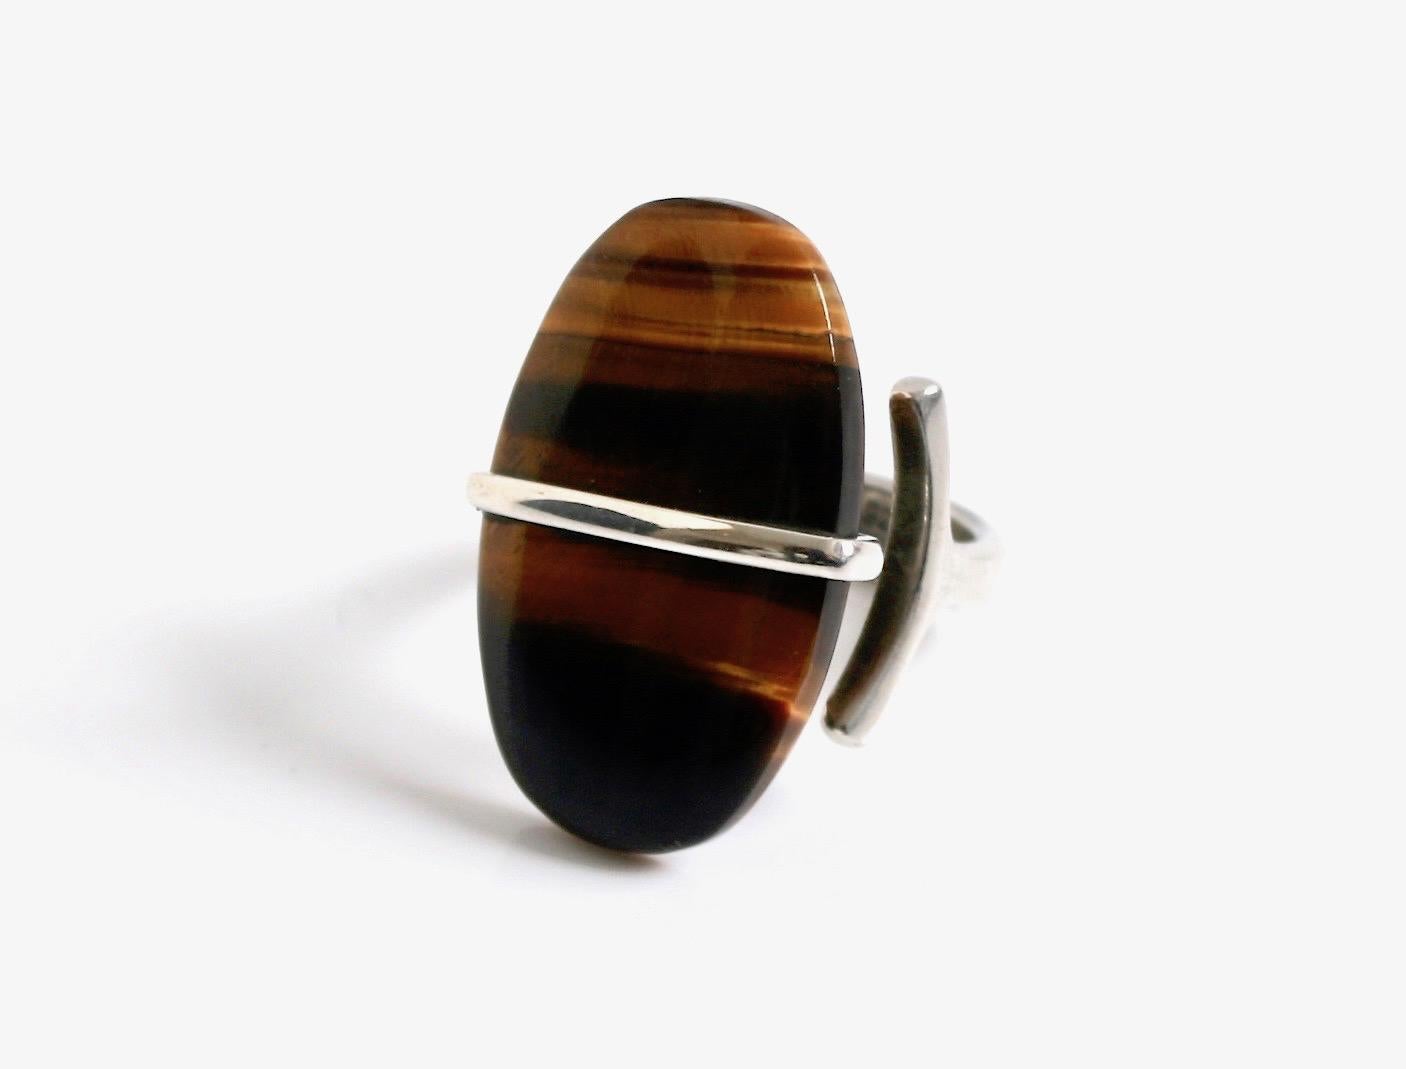 Early vintage Georg Jensen sterling silver & Tiger Eye ring designed by Vivianna Torun Bulow-Hube Denmark c.1960 
Design number 190 comes in the original Georg Jensen box
The Tigers eye/Banded Agate is a beautiful colour
Size UK P